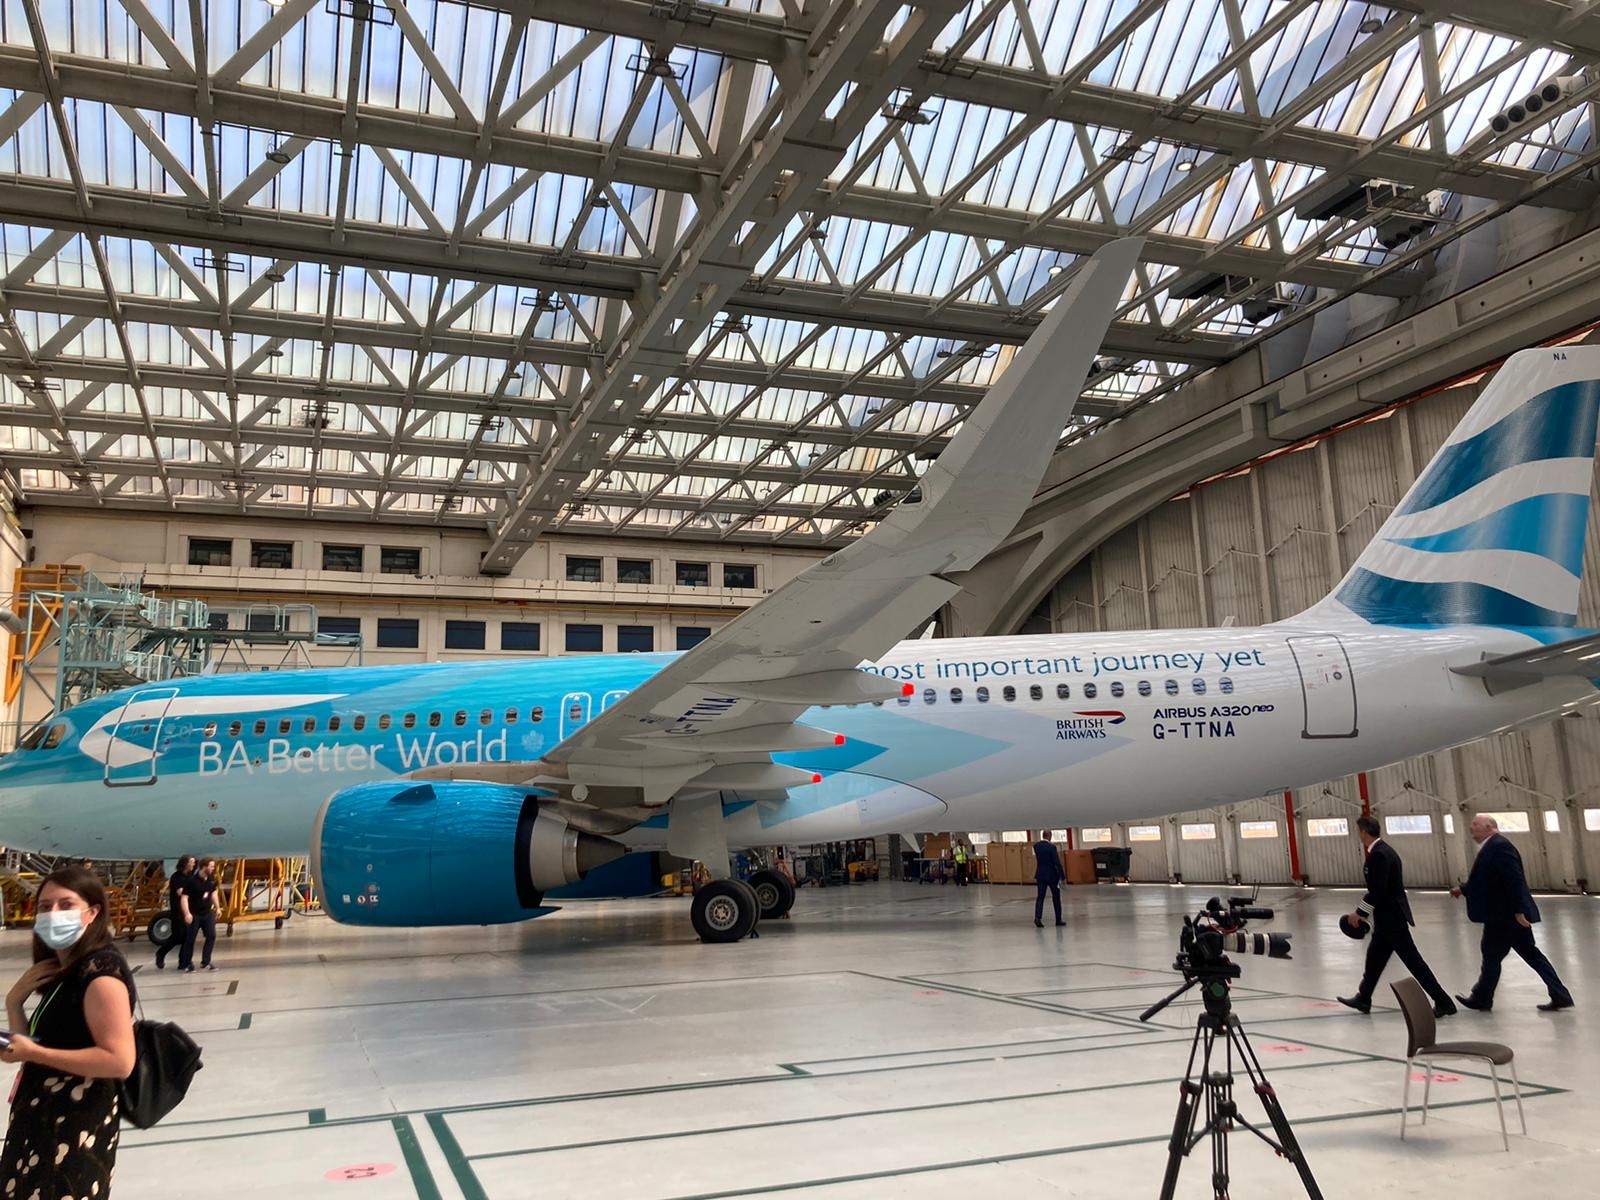 A British Airways A320neo painted in new livery stands in a hangar at Heathrow Airport to launch the airline's BA Better World sustainability programme, in London